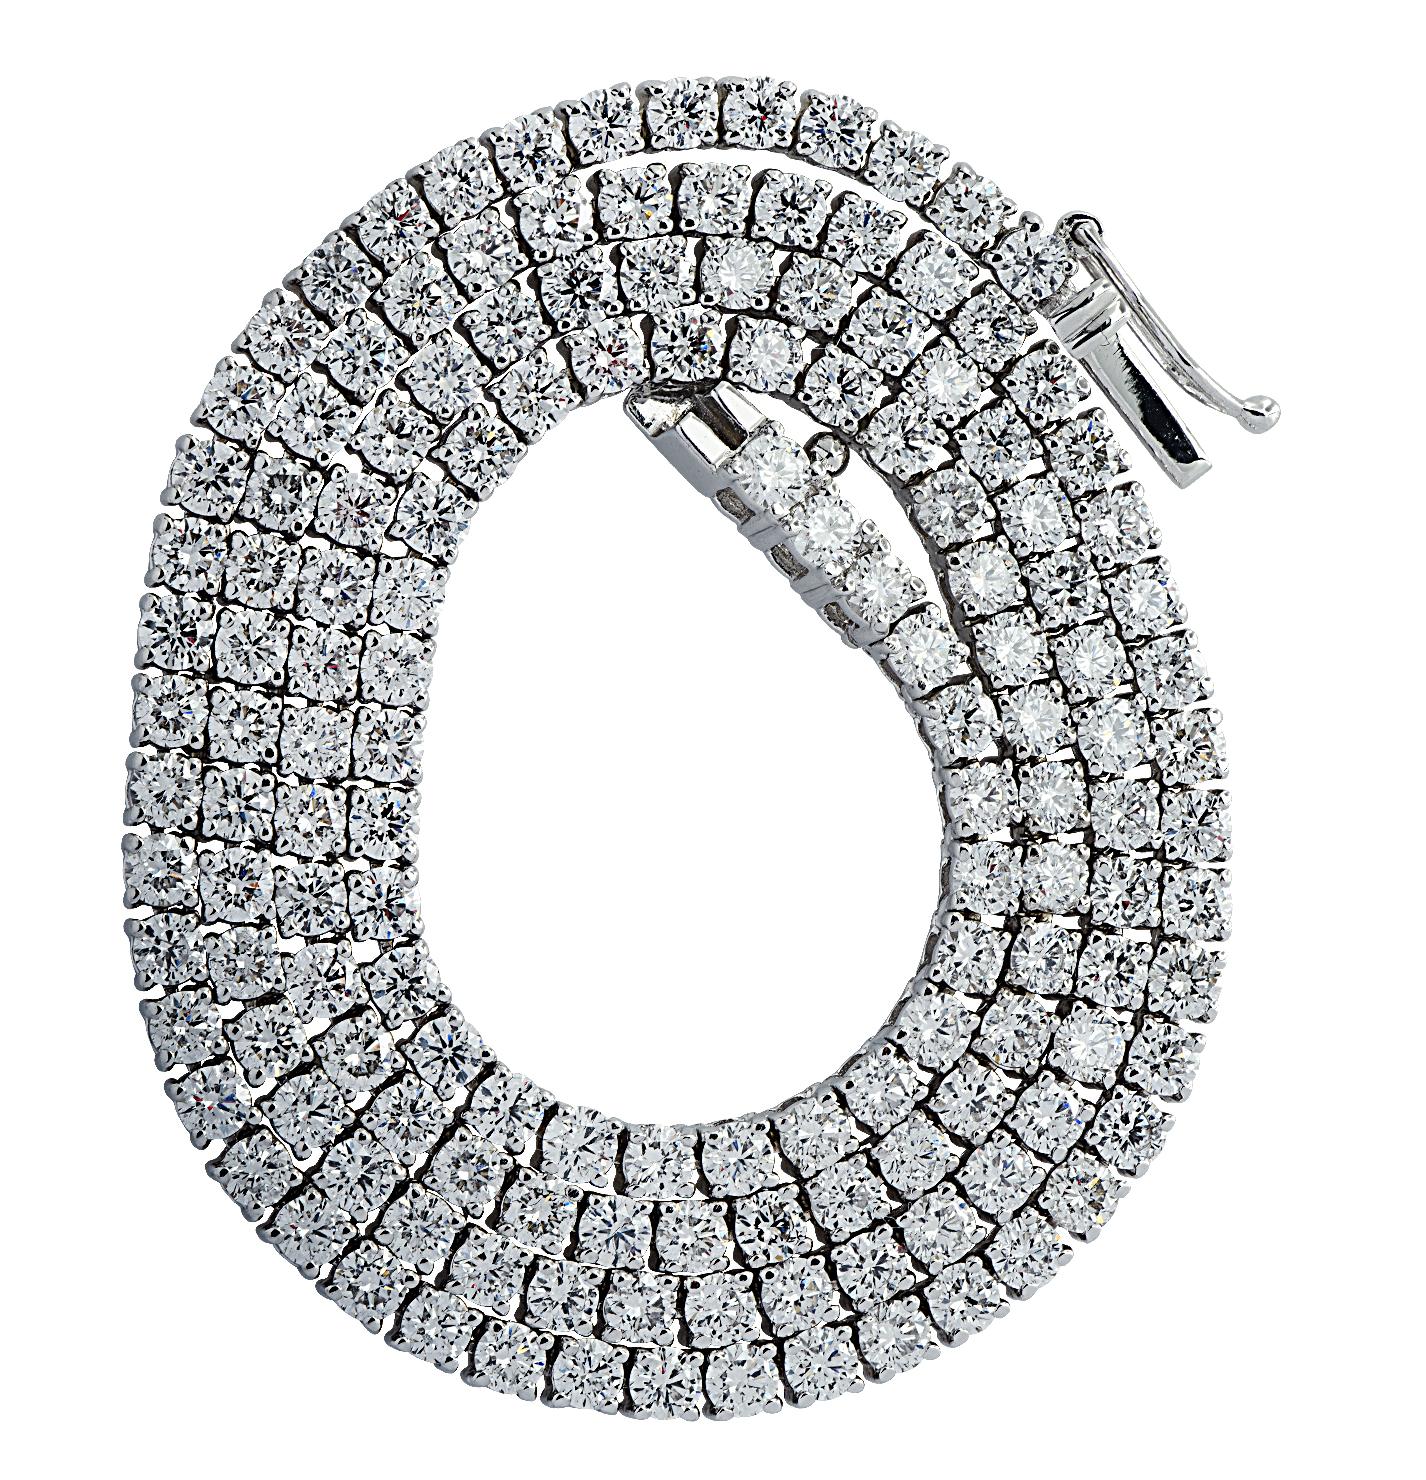 Exquisite Vivid Diamonds Straight Line diamond tennis necklace crafted in 18k karat white Gold, showcasing round brilliant cut diamonds weighing 9.85 carats total, G color, VS-SI Clarity. Each diamond was carefully selected, perfectly matched and